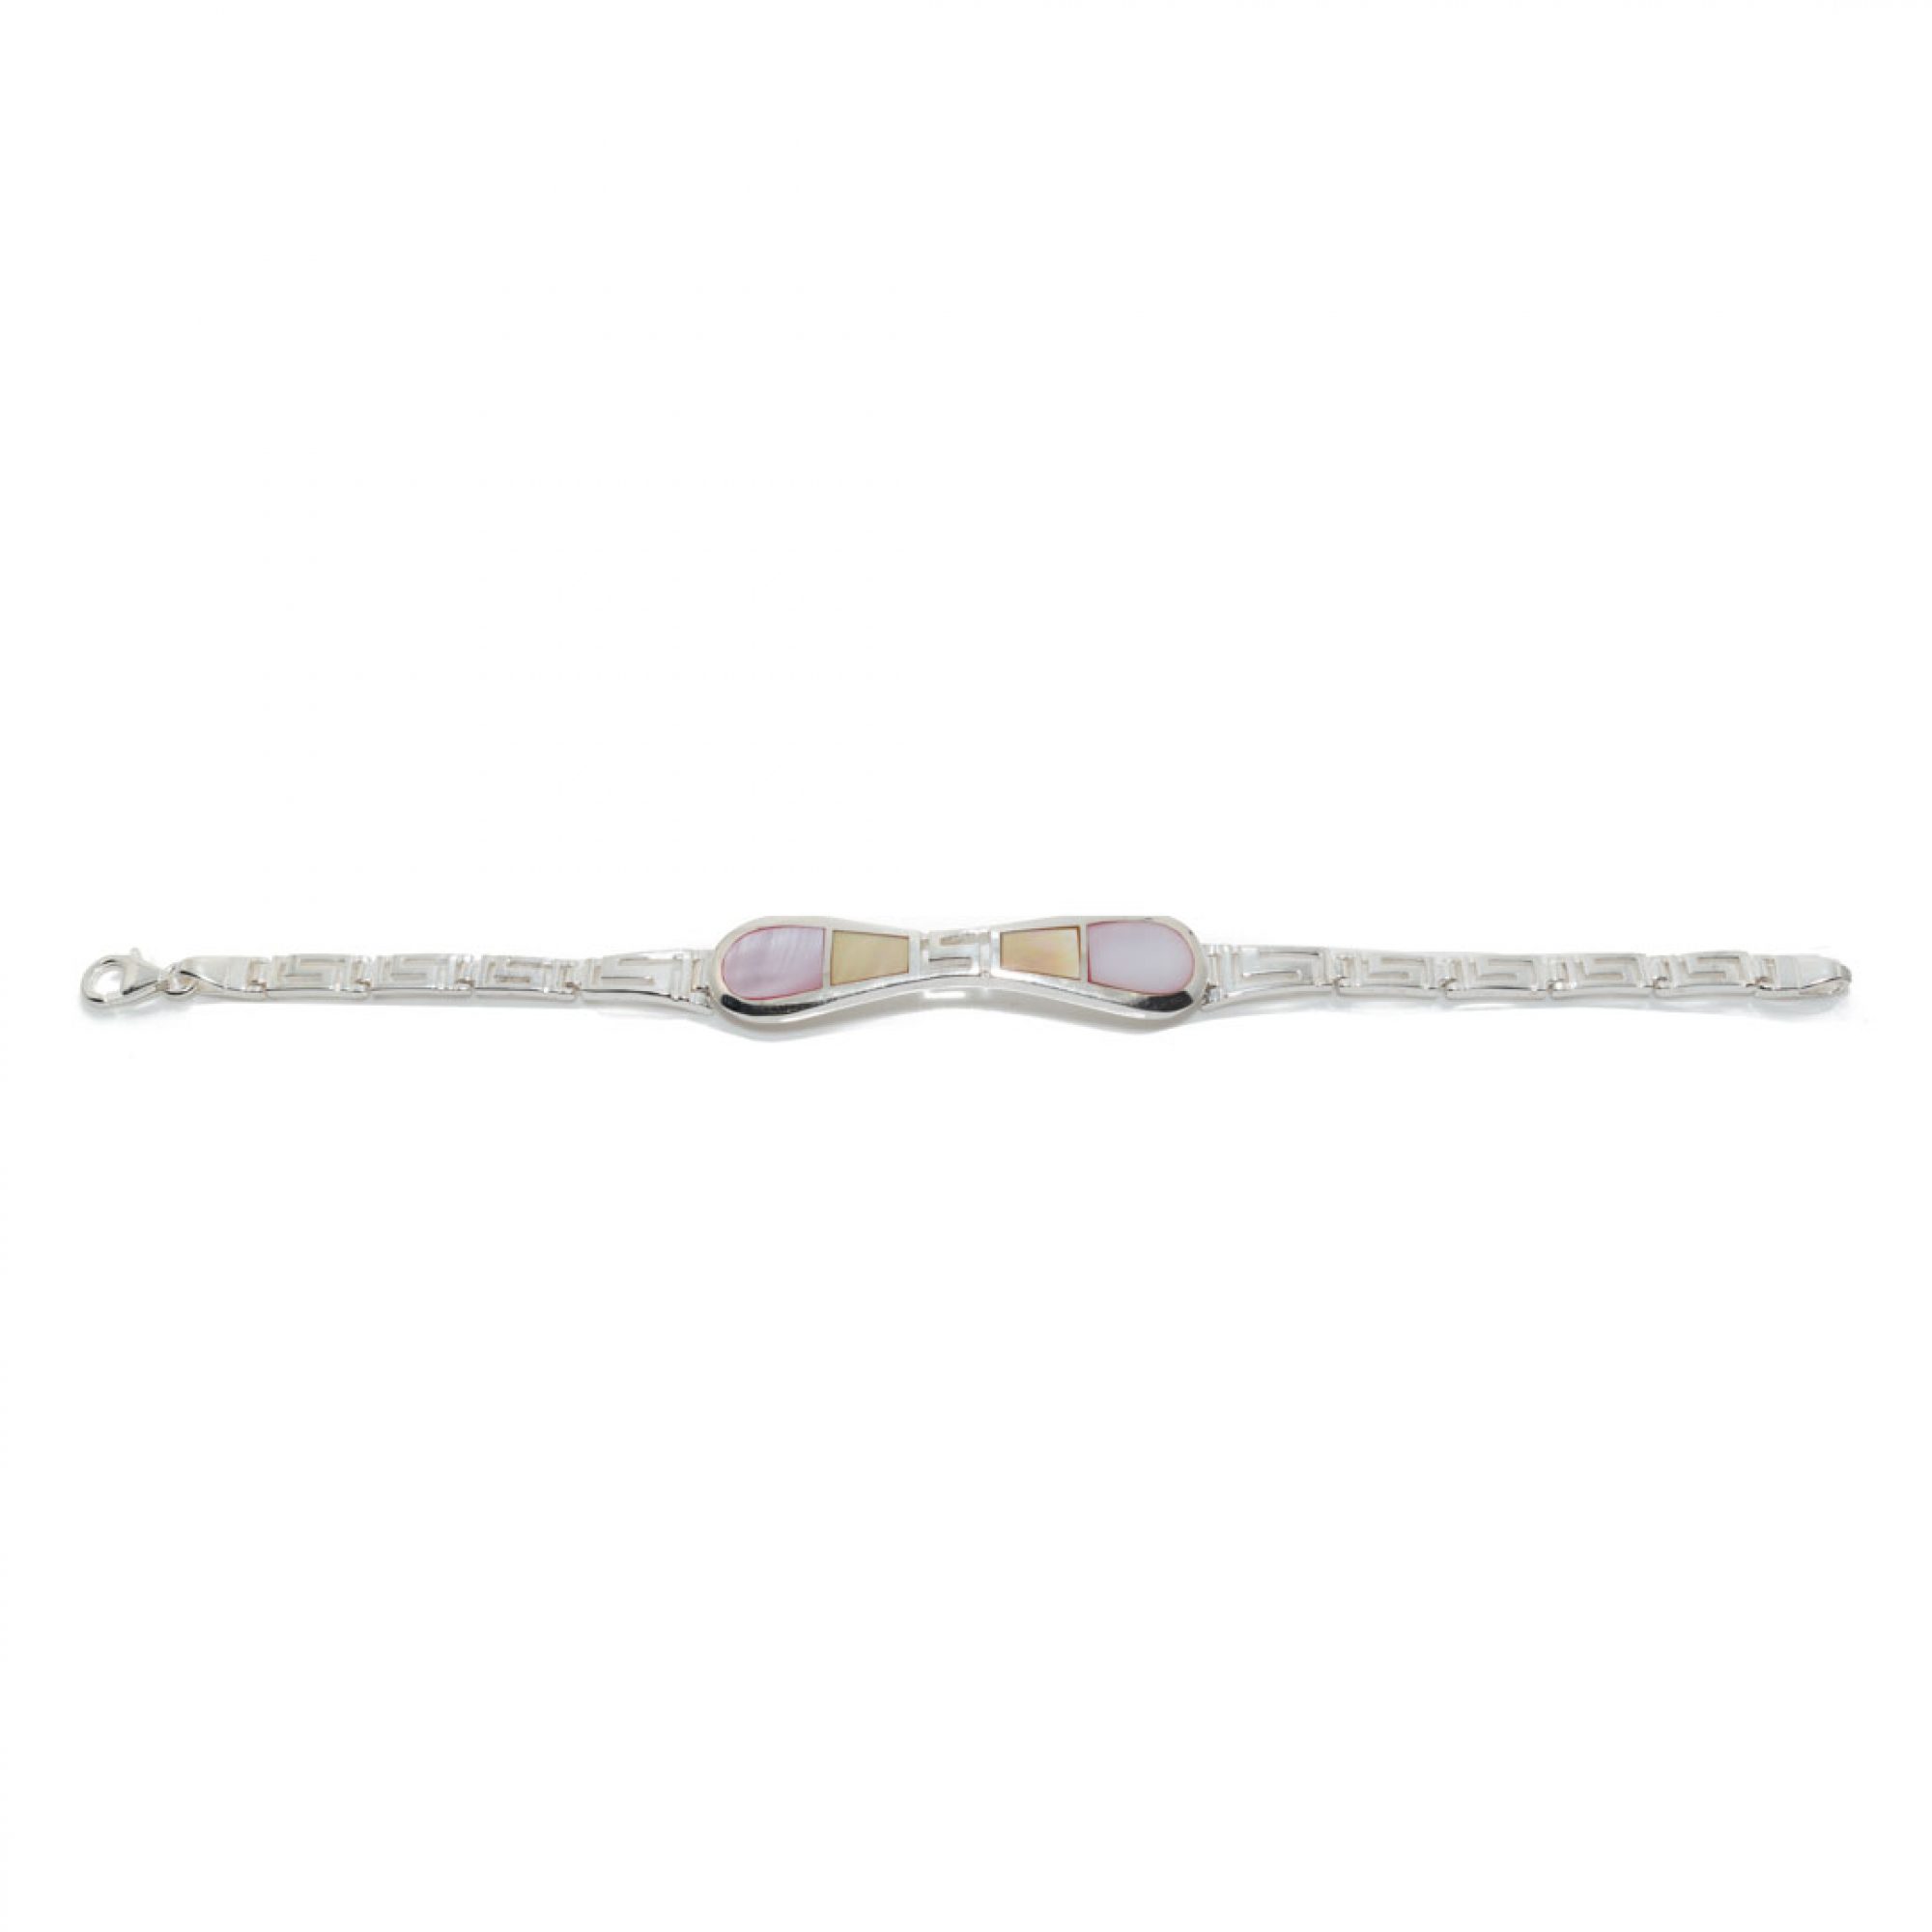 Meander bracelet with mother of pearl stones